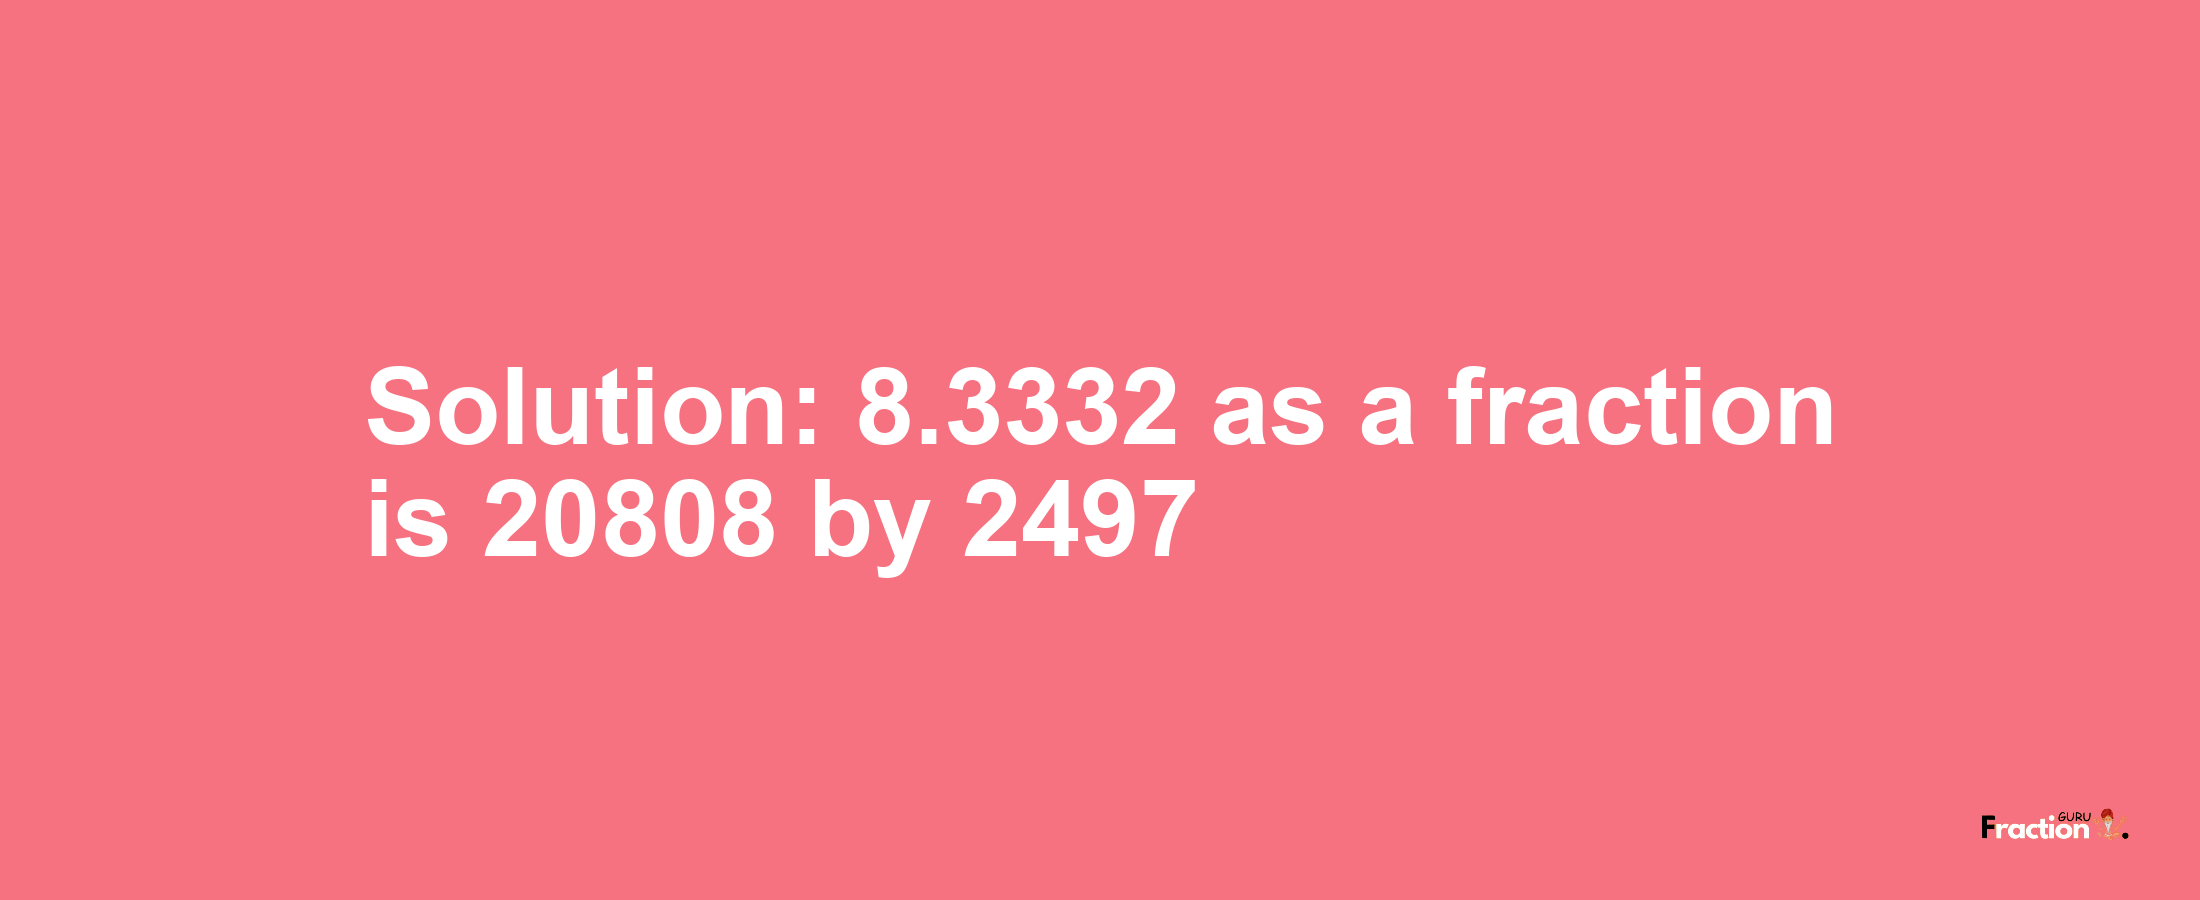 Solution:8.3332 as a fraction is 20808/2497